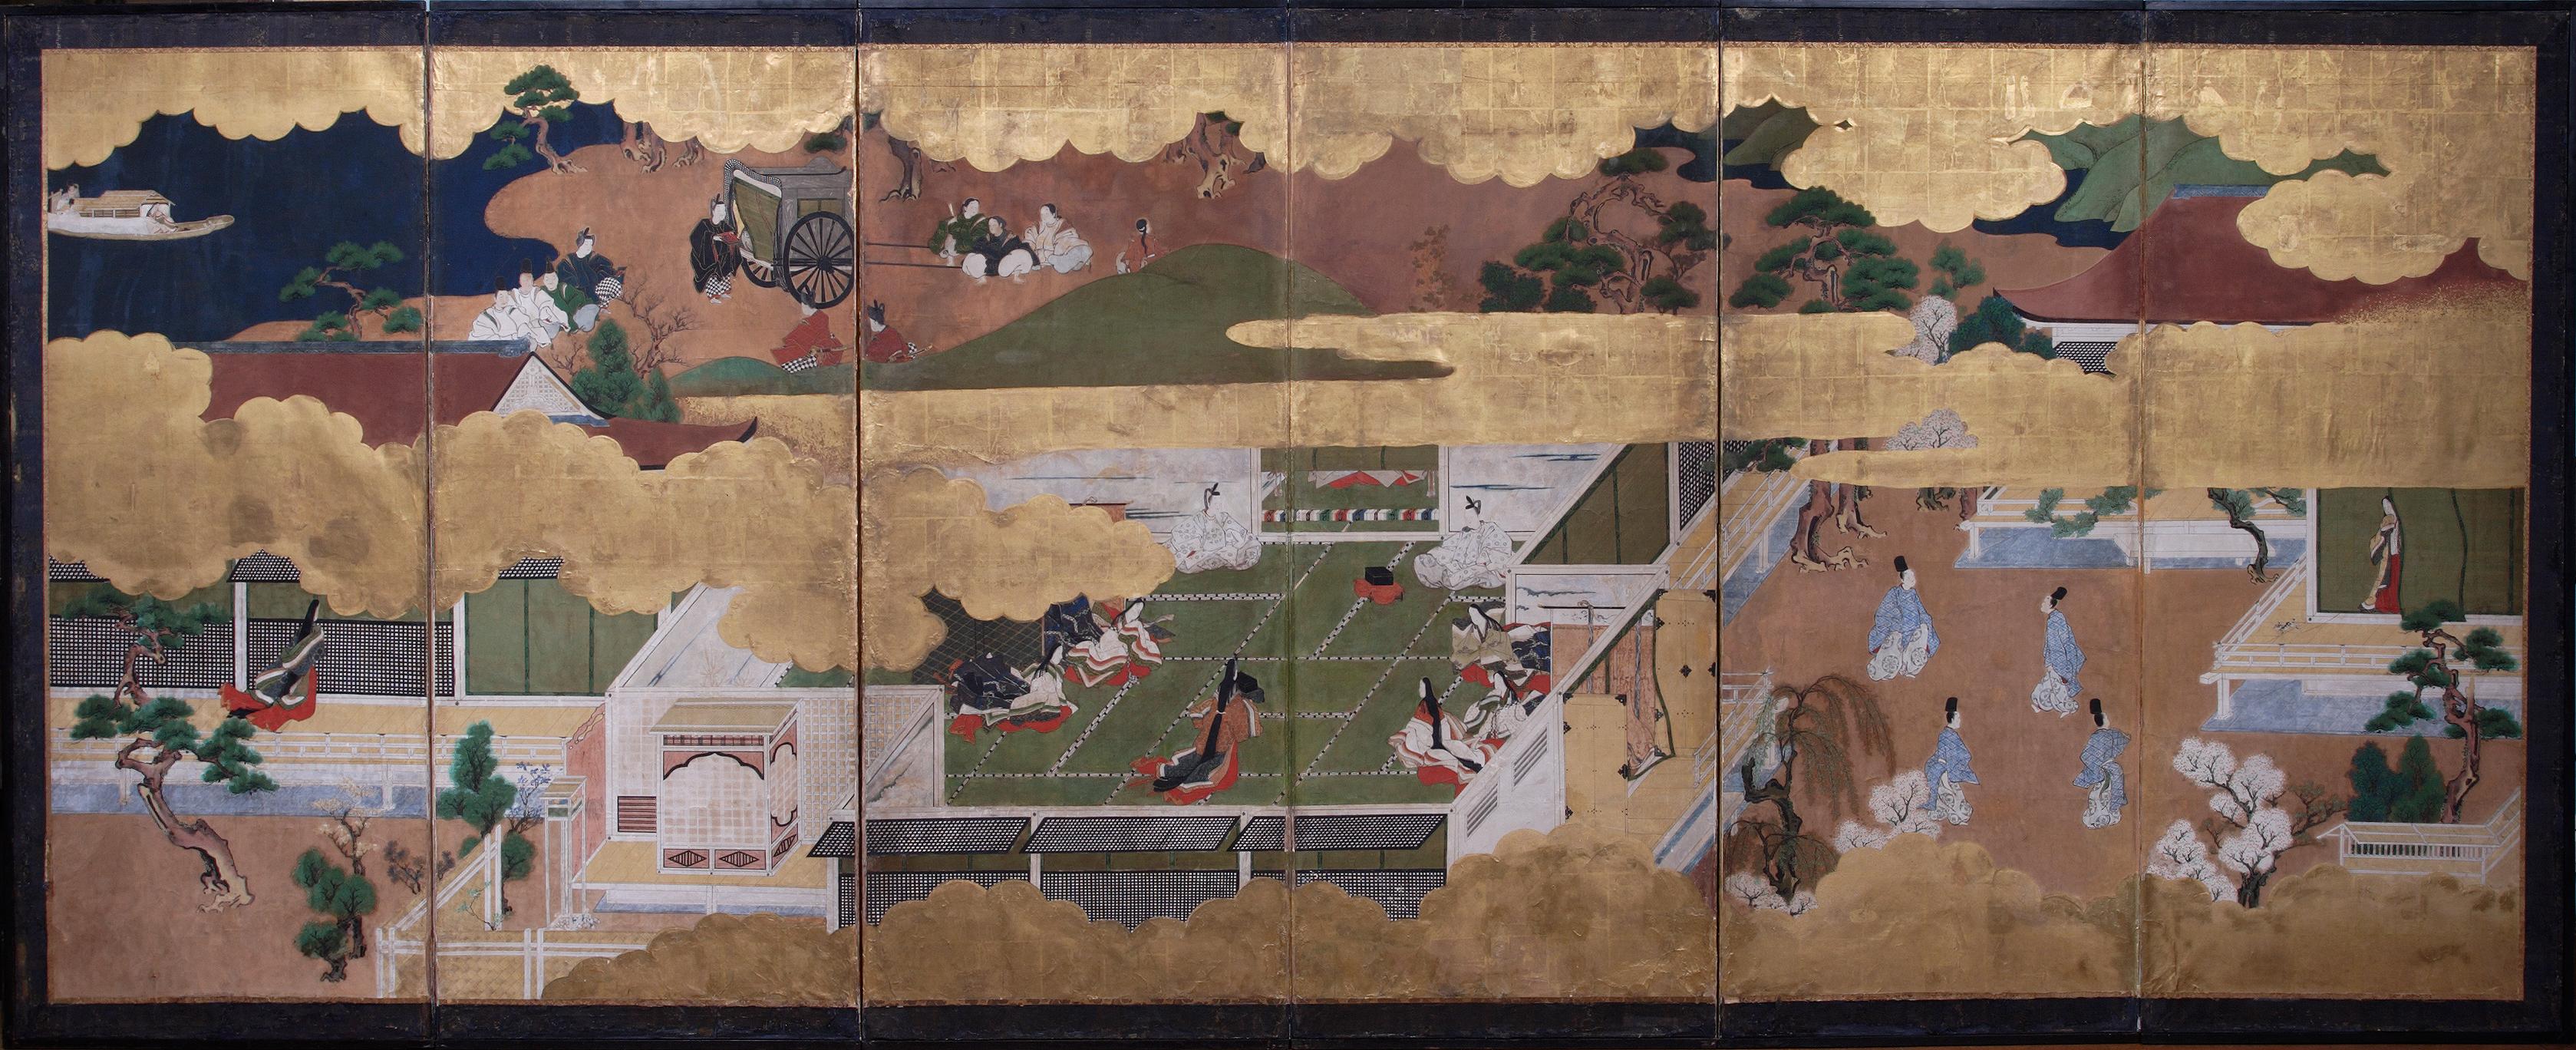 An important Japanese six-fold screen, depicting episodes from The Tale of The Genji

Edo period, 17th century

Ink and colour on gilded paper, H. 155 x W. 380 cm 

The Tale of Genji was a popular subject for narrative illustration throughout the